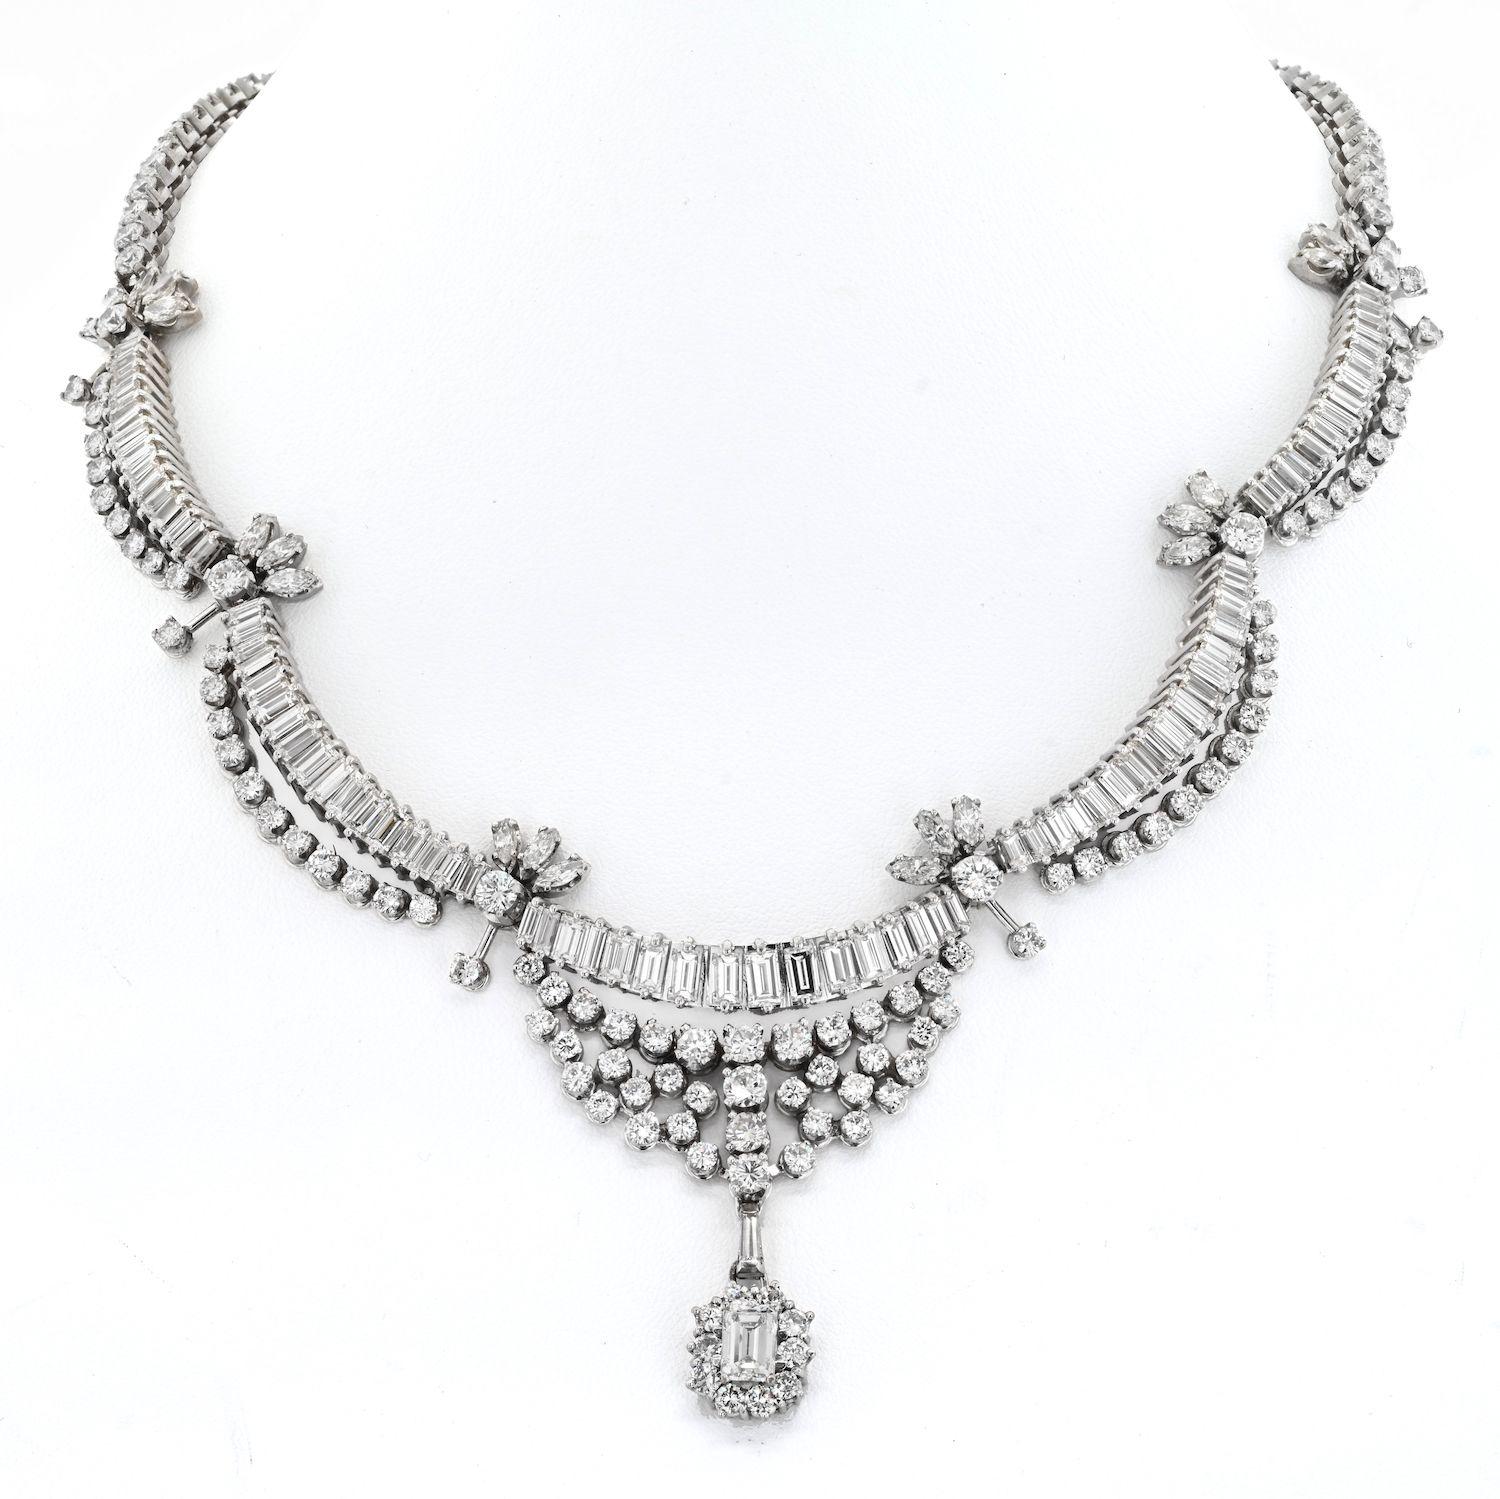 We love jewelry from 1950's, it is the time when going out was eventful and every restaurant outing was about dressing and looking your best. We can see this necklace being worn by someone special: crafted in platinum with diamonds encrusted around